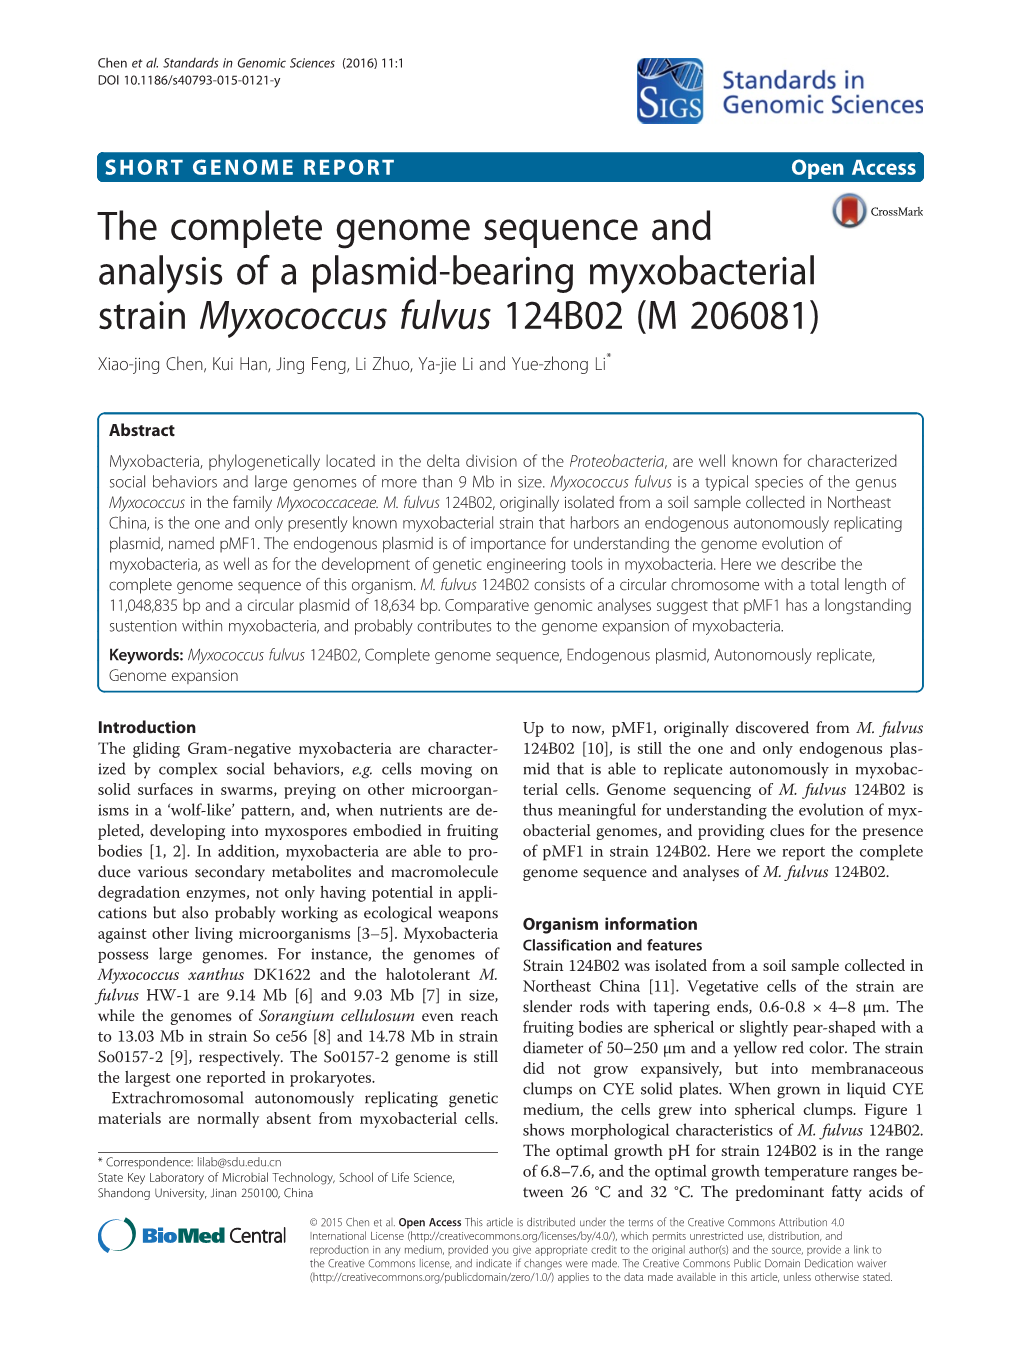 The Complete Genome Sequence and Analysis of a Plasmid-Bearing